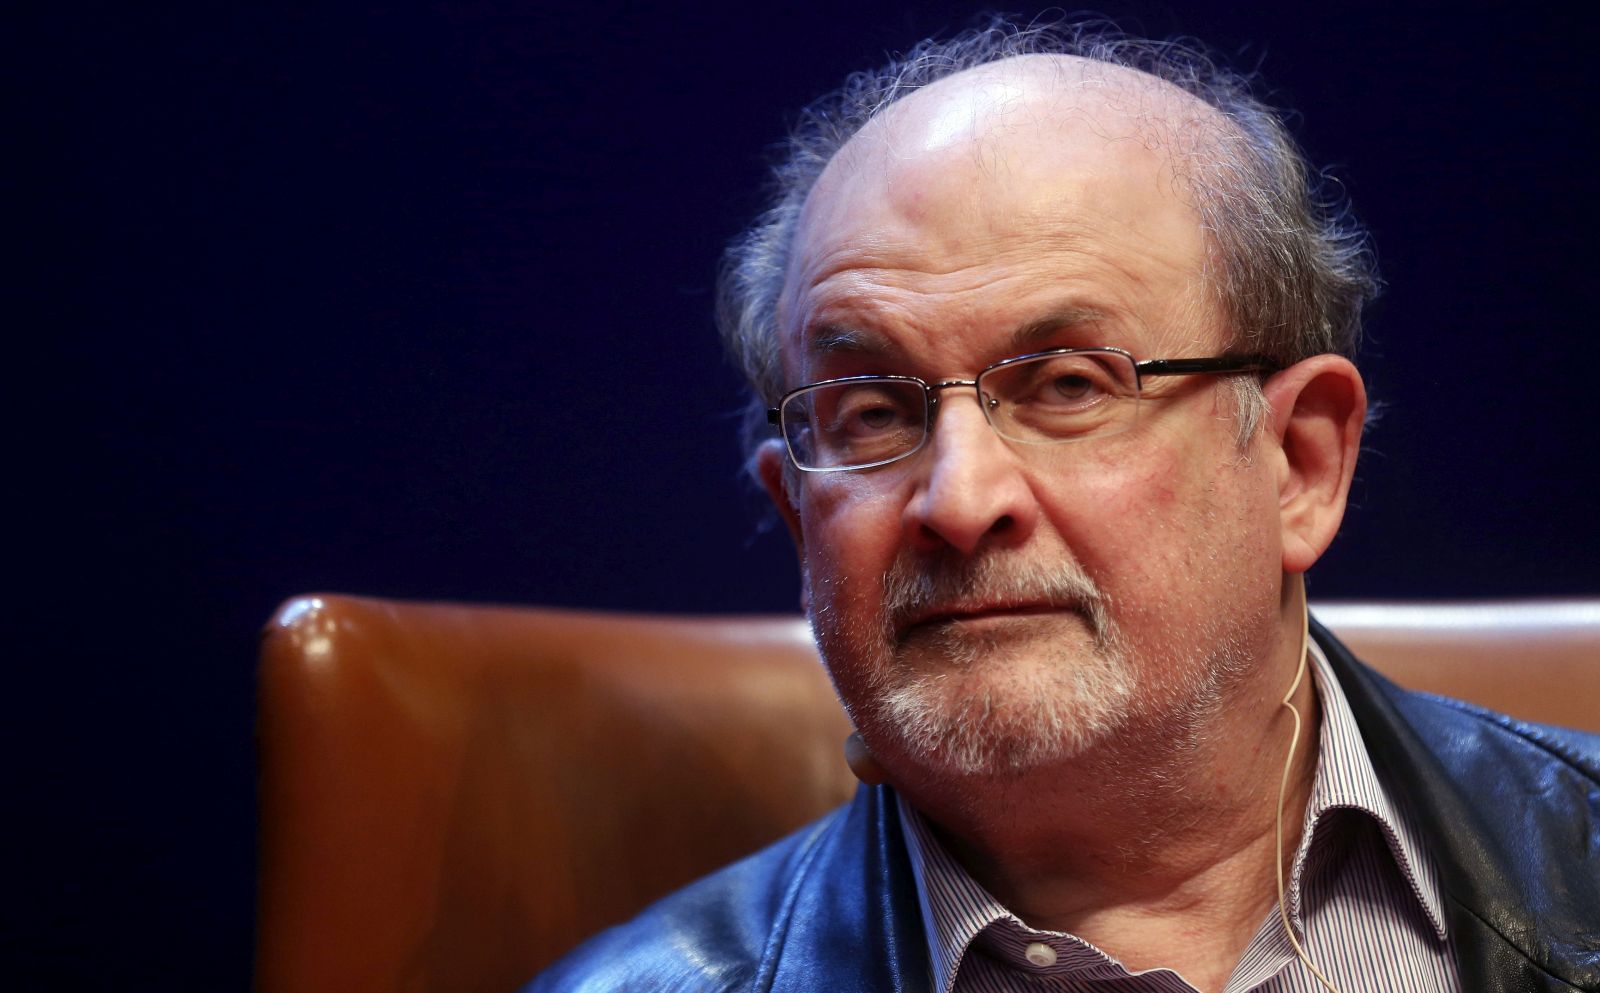 epa10117473 (FILE) - Indian-British writer Salman Rushdie presents his book 'Two Years Eight Months and Twenty-Eight Nights' in Aviles, Spain, 07 October 2015 (reissued 12 August 2022). Rushdie and an interviewer were attacked while on stage at an event in Chautauqua, New York State, USA, on 12 August 2022. The suspect was taken into custody, New York State police said. Rushdie, who was apparently stabbed in the neck, was transported to a hospital. His condition is not yet known.  EPA/JL CEREIJIDO *** Local Caption *** 53580620